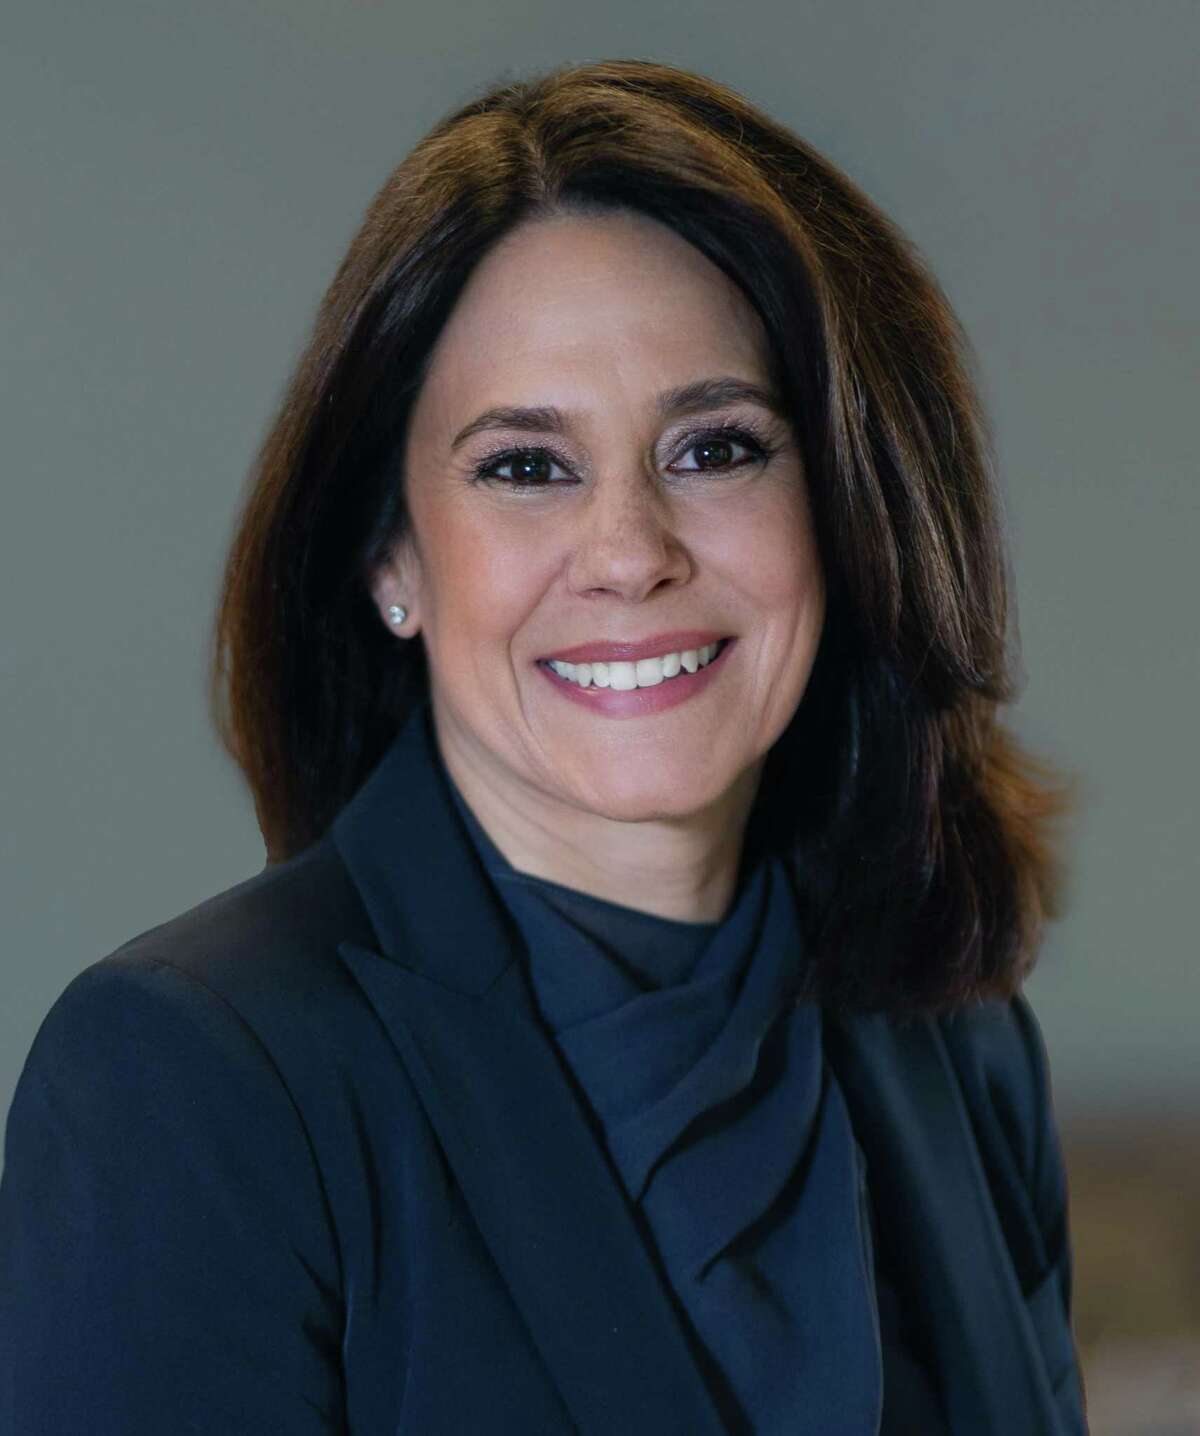 Lorie Logan was named president of the Federal Reserve Bank of Dallas.